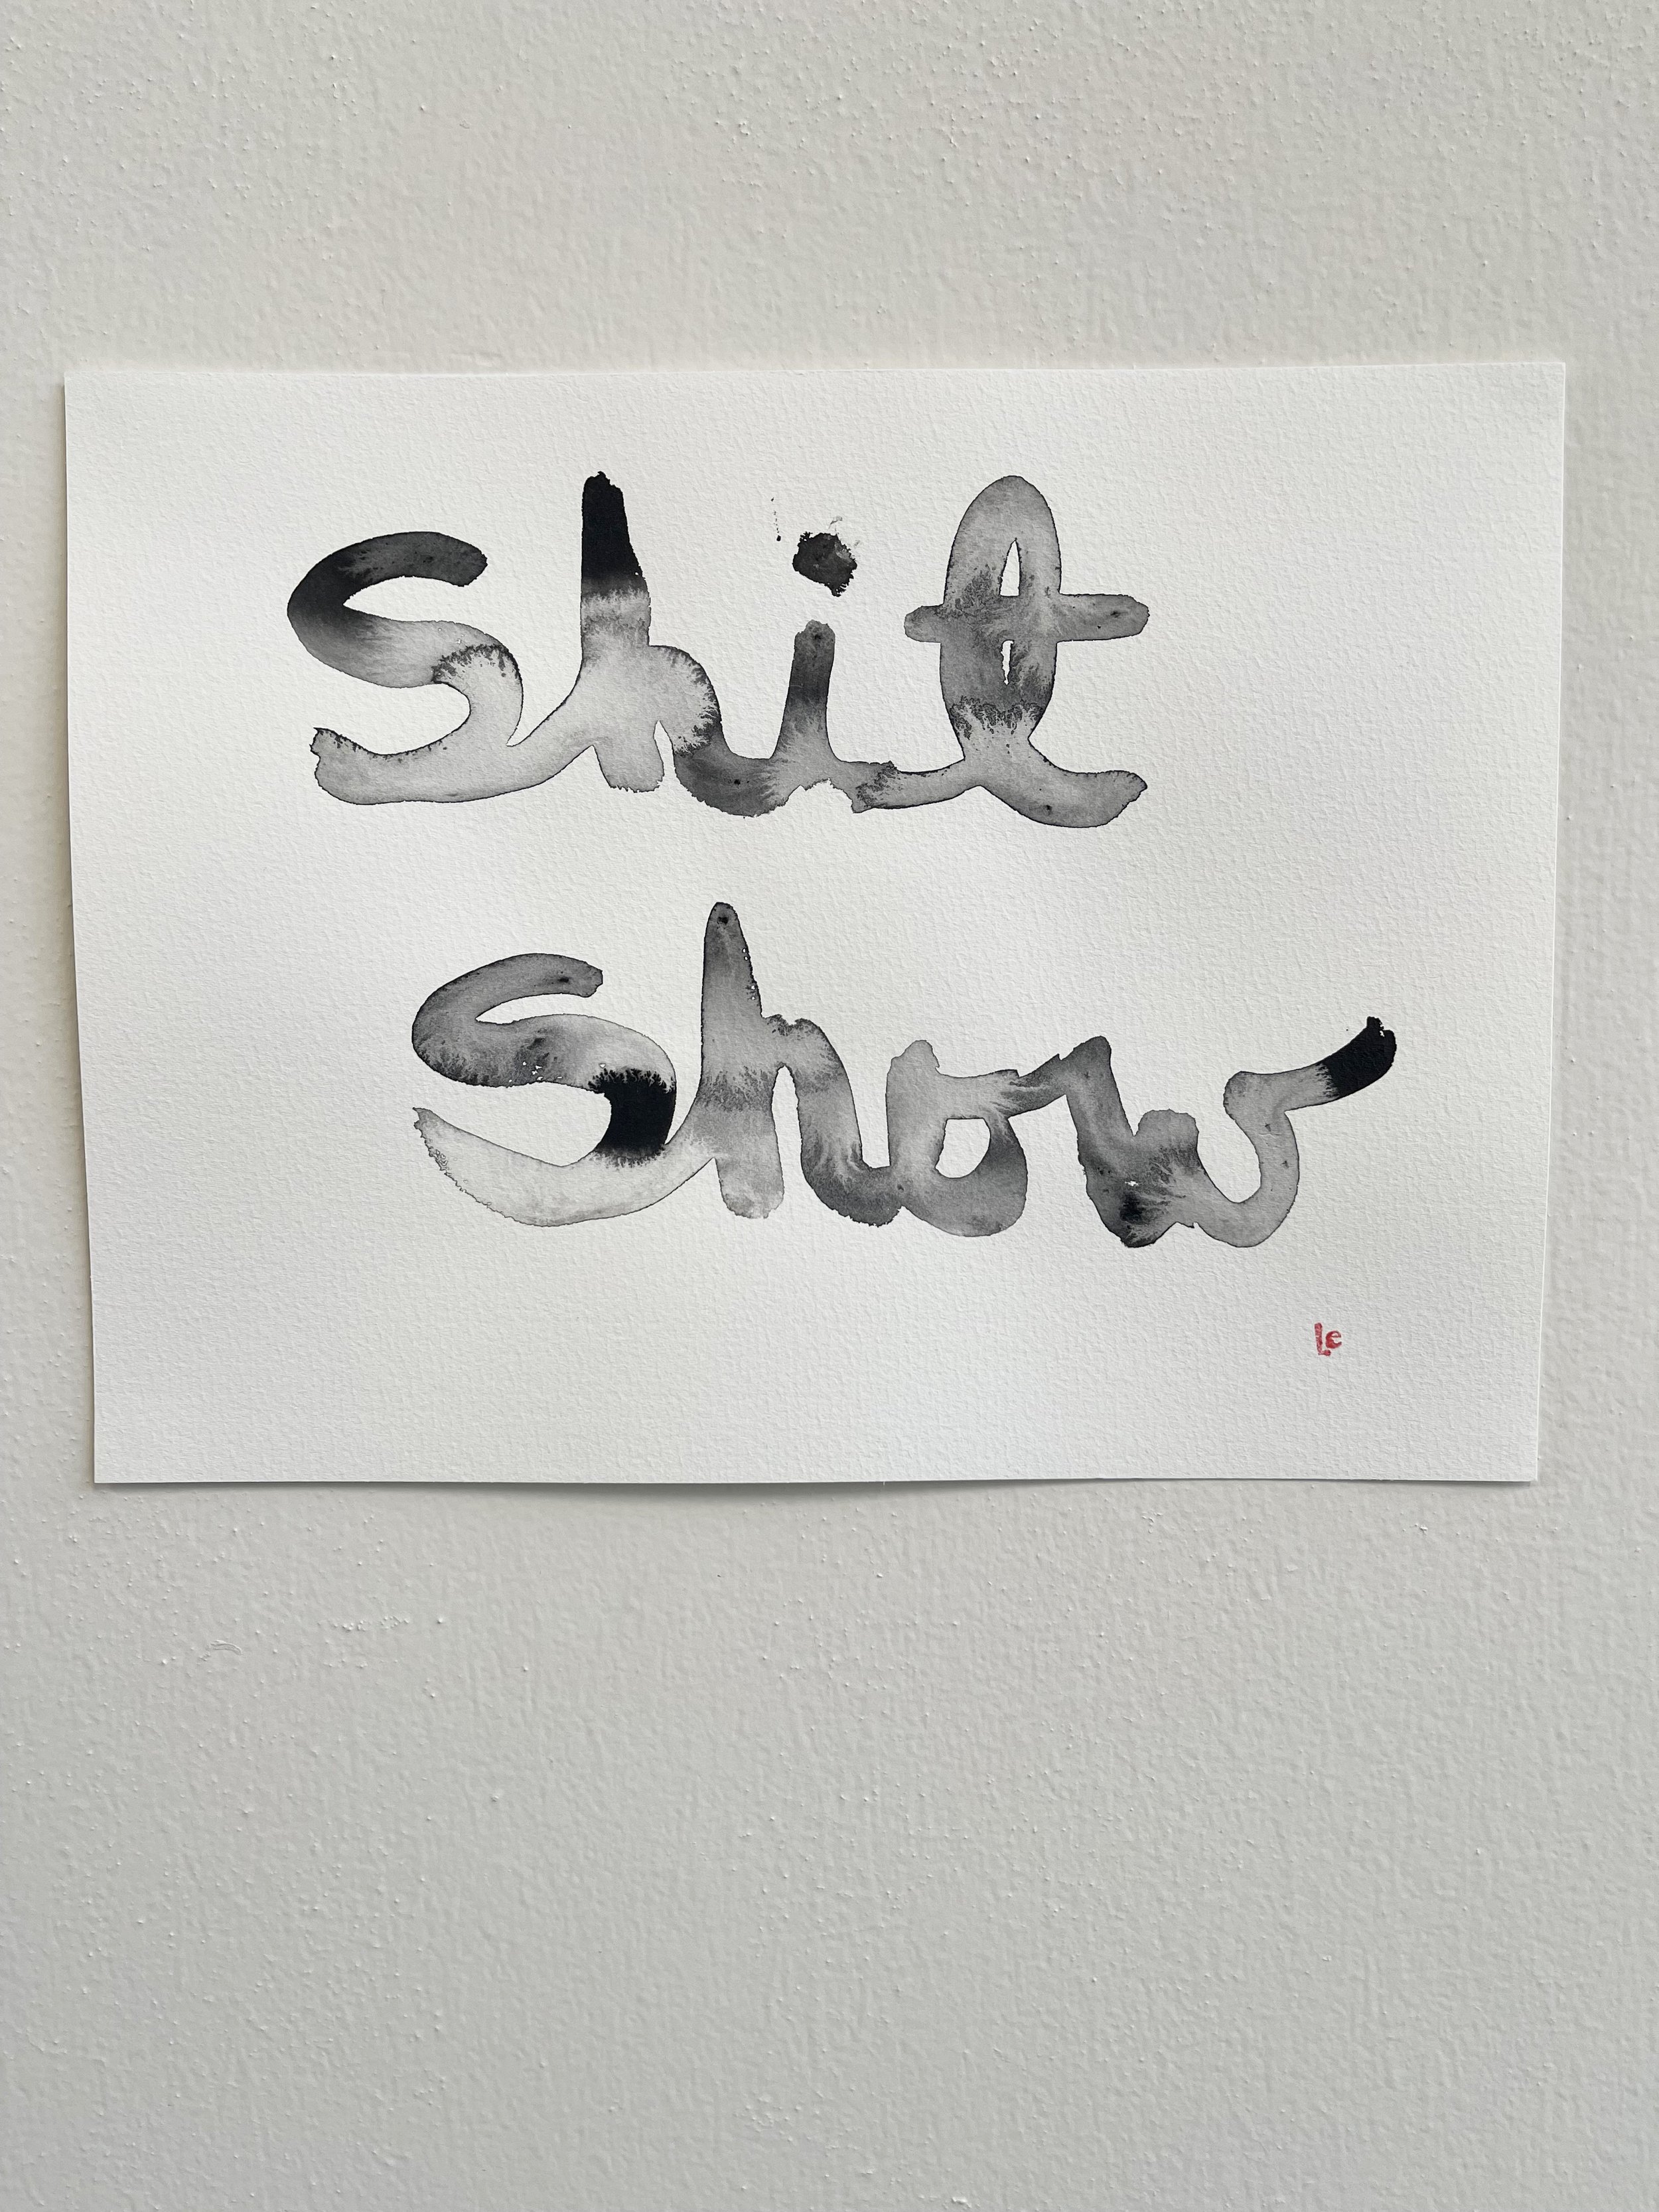 shit show, 2023 | sumi ink on Fabriano paper | 12" x 9"